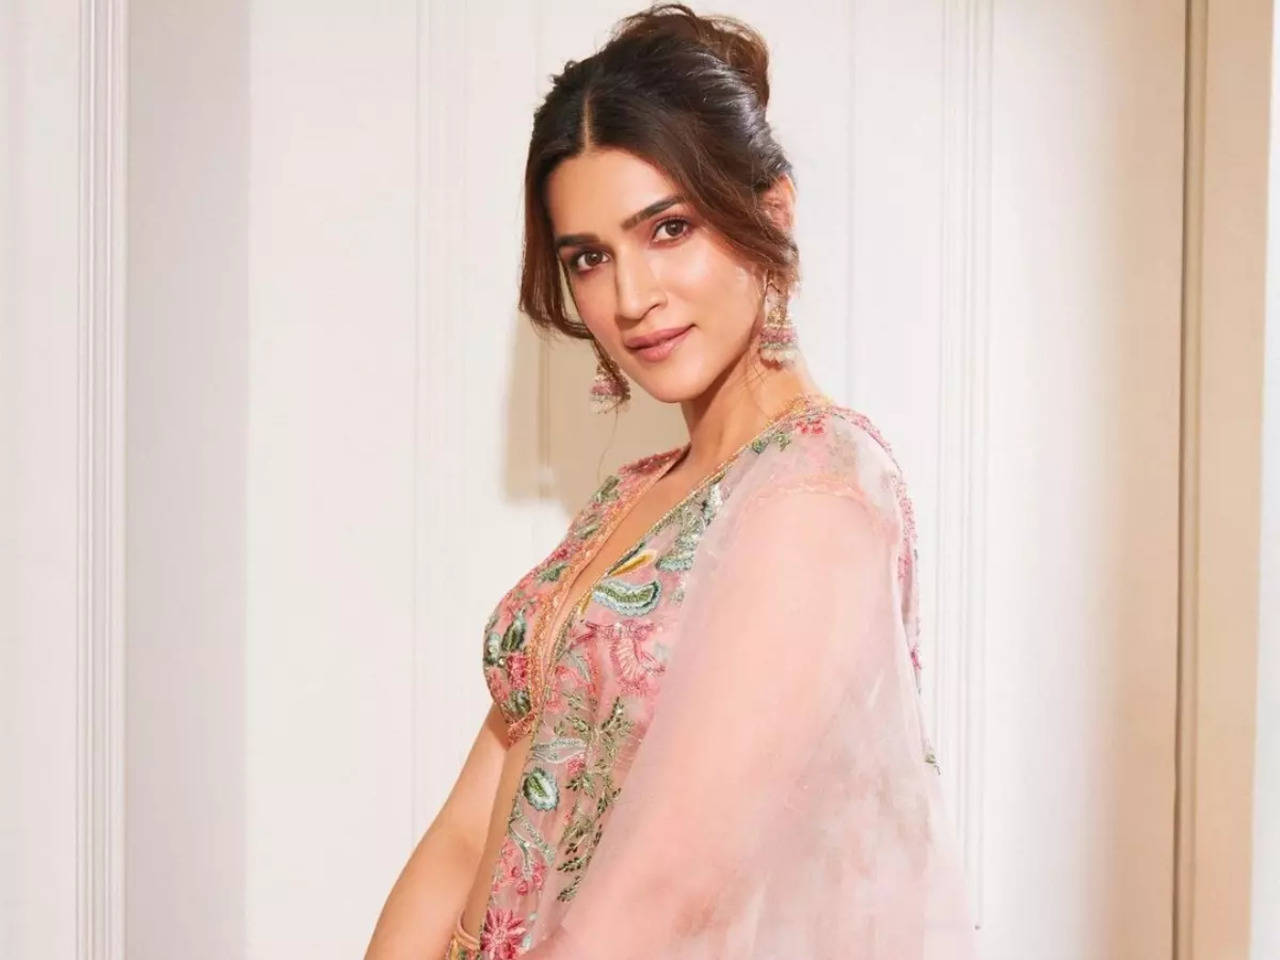 Kriti Sanon gets new hair colour for a new film, says she has butterflies  in the stomach | Hindi Movie News - Times of India